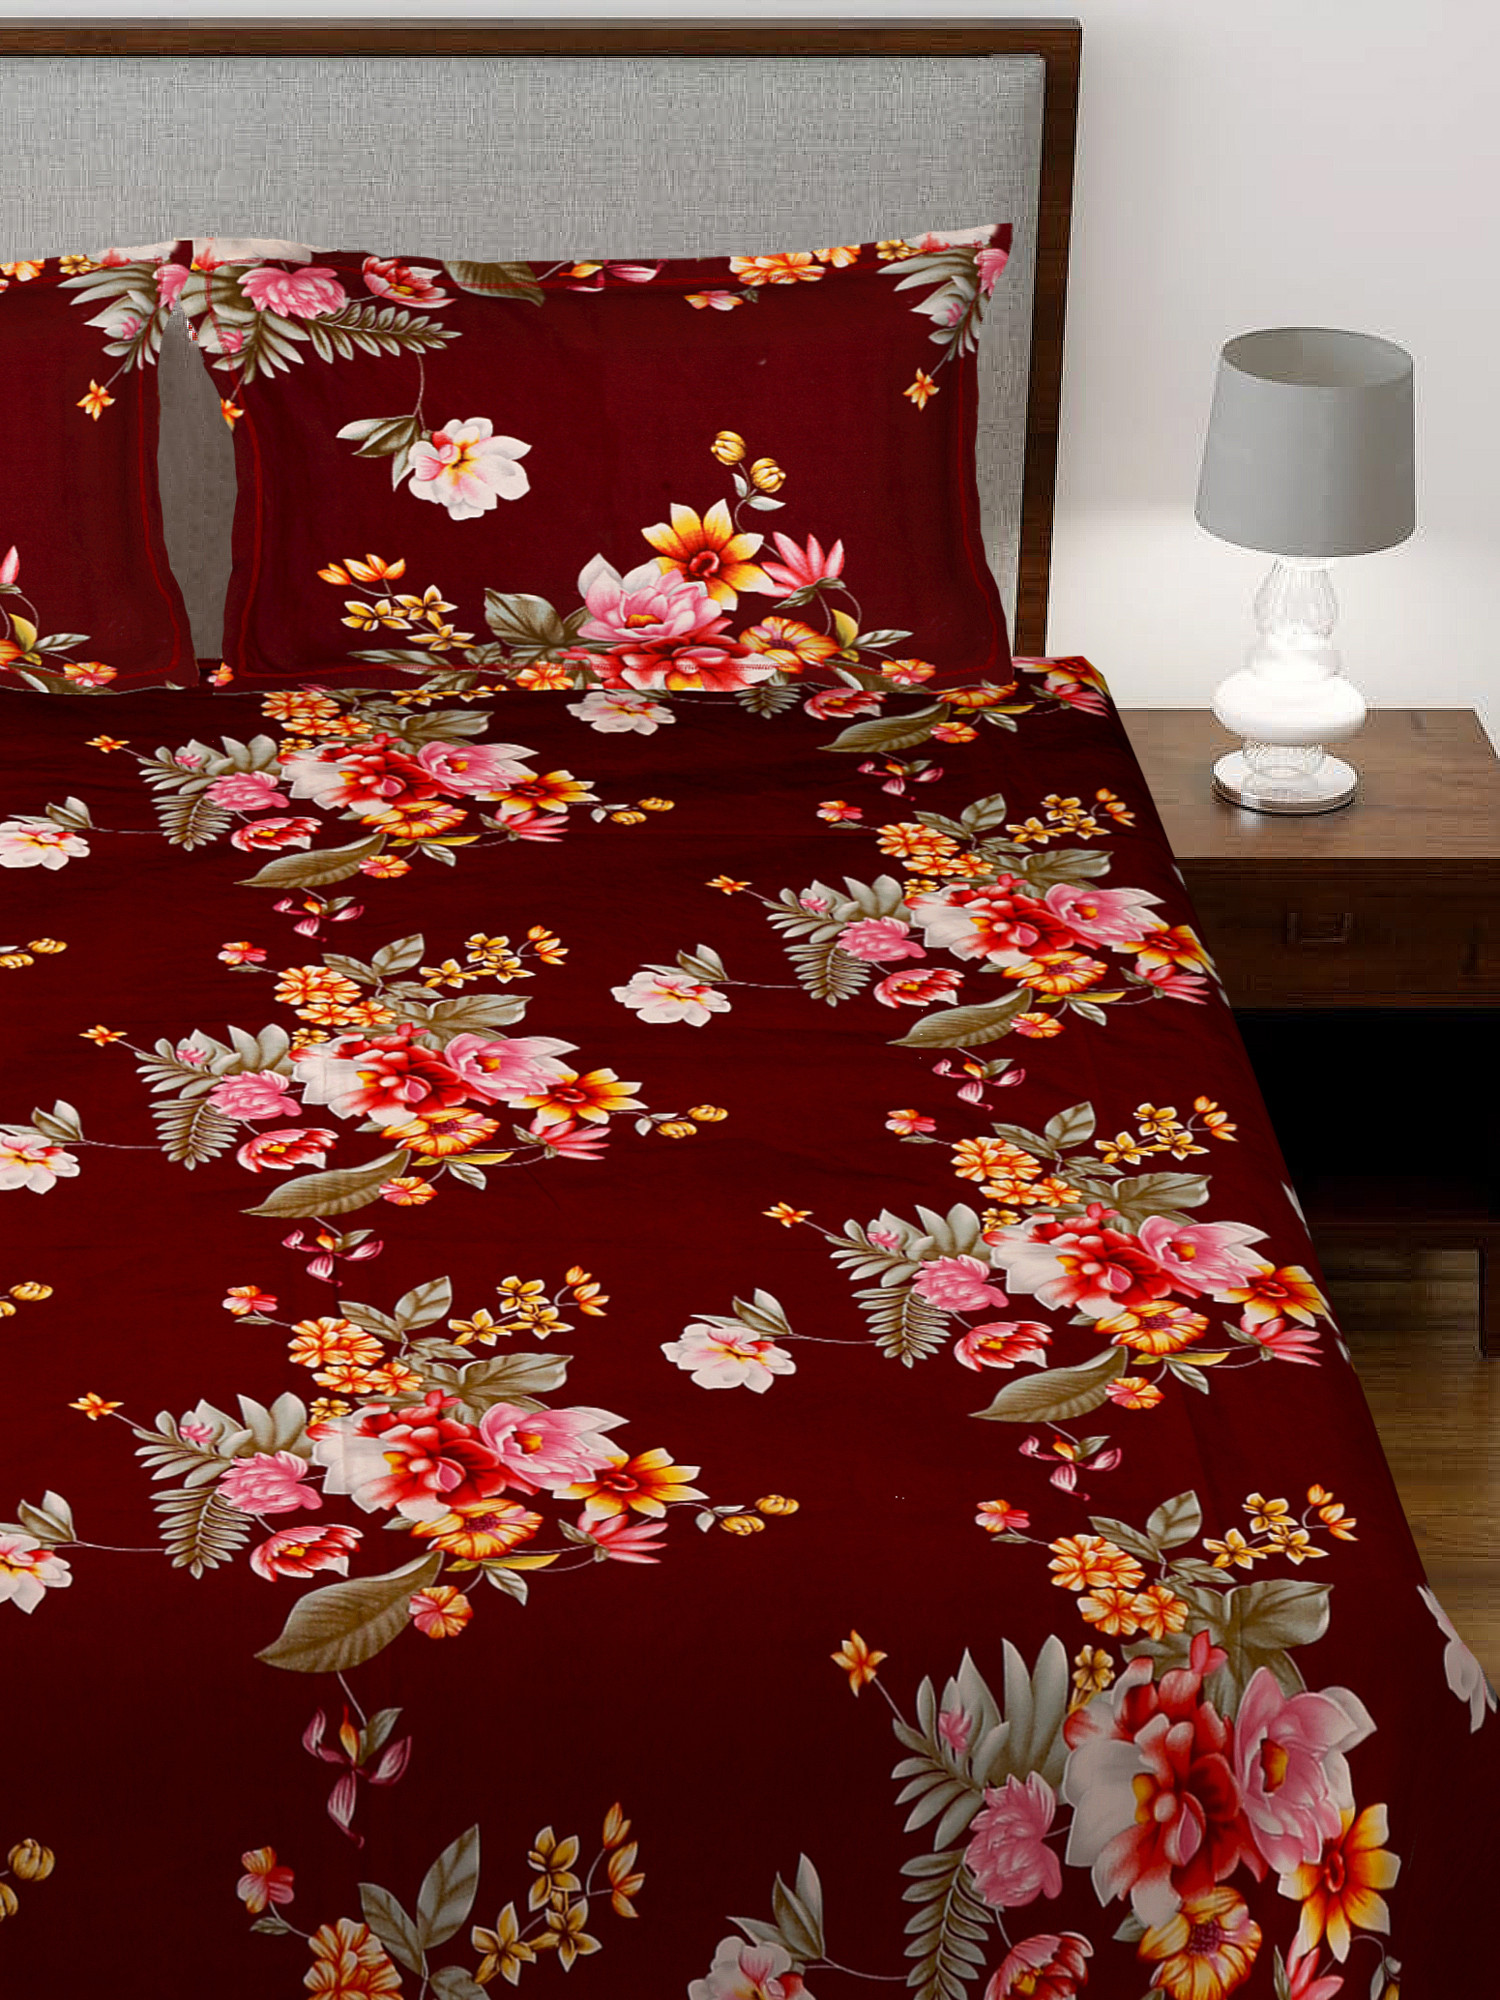 Kuber Industries Flower Print Glace Cotton 144 TC King Size Double Bedsheet with 2 Pillow Covers (Maroon)